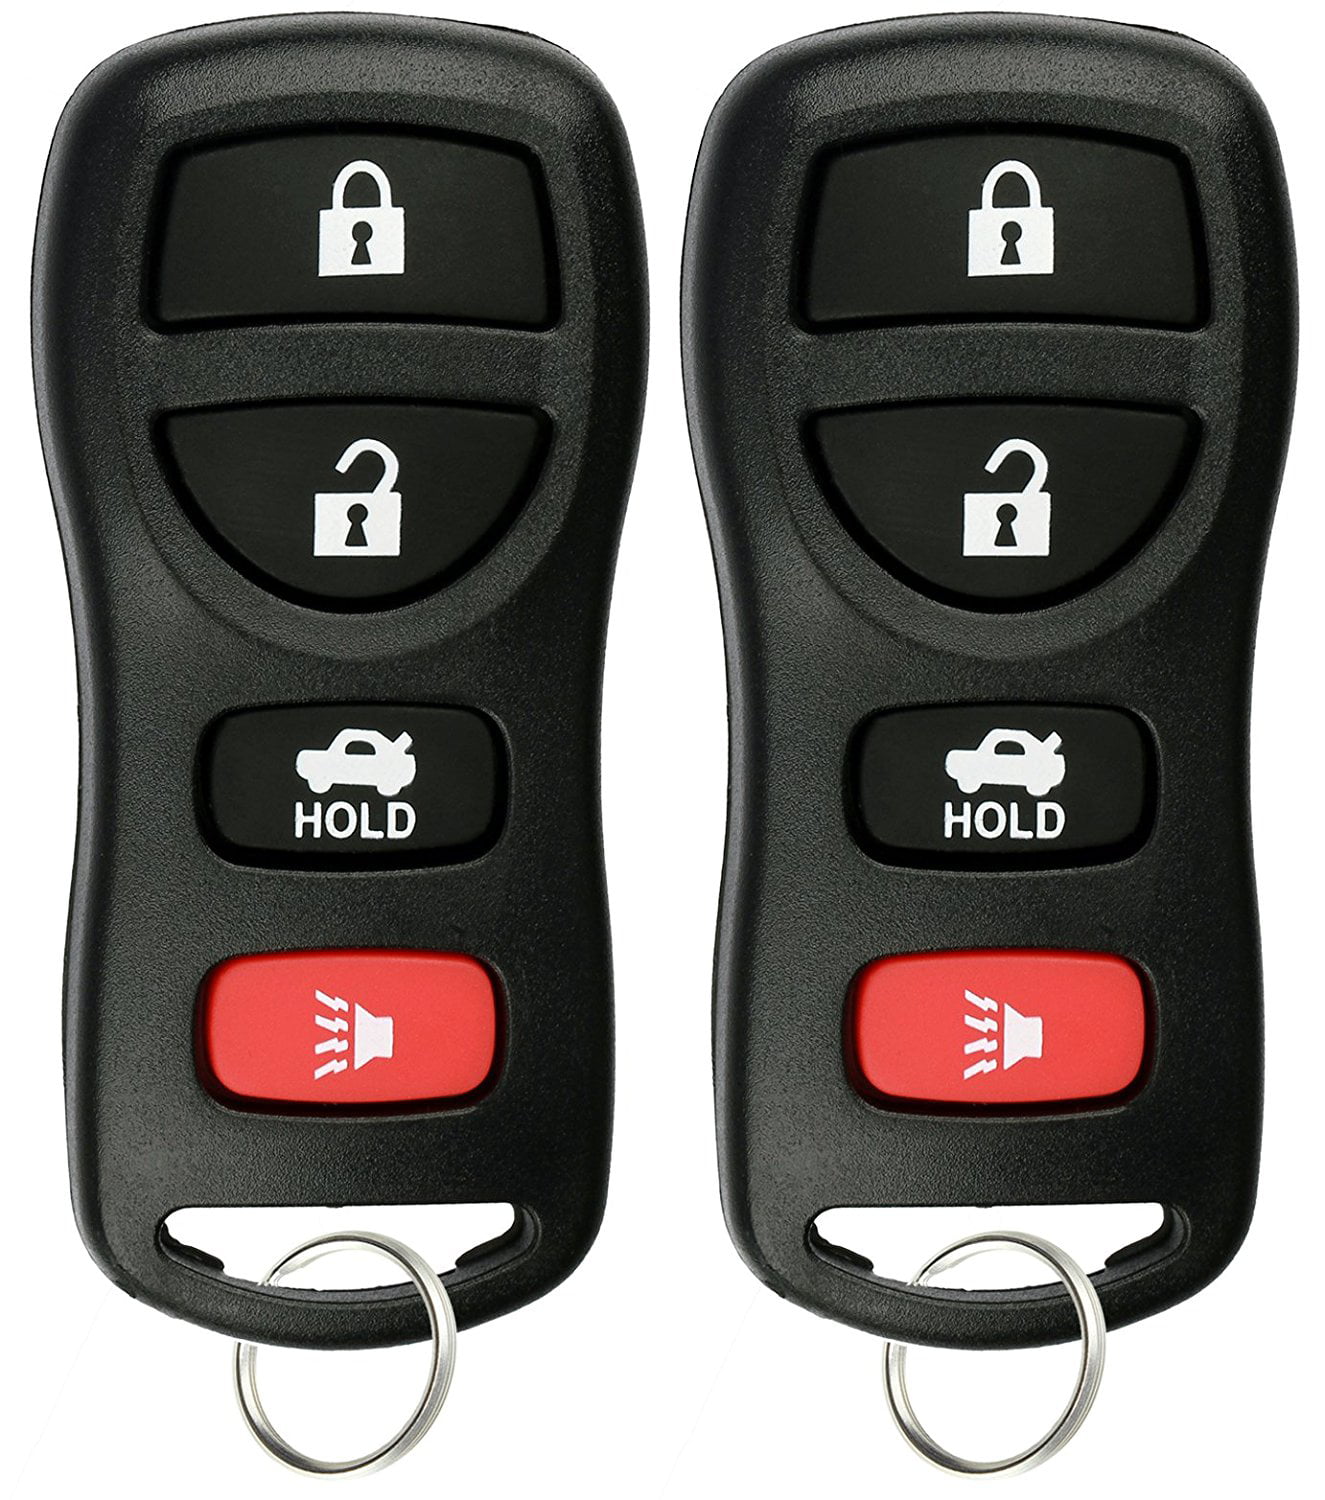 NEW Keyless Entry Key Fob Remote For a 2004 Nissan Xterra REPAIR CASE ONLY 3BTN